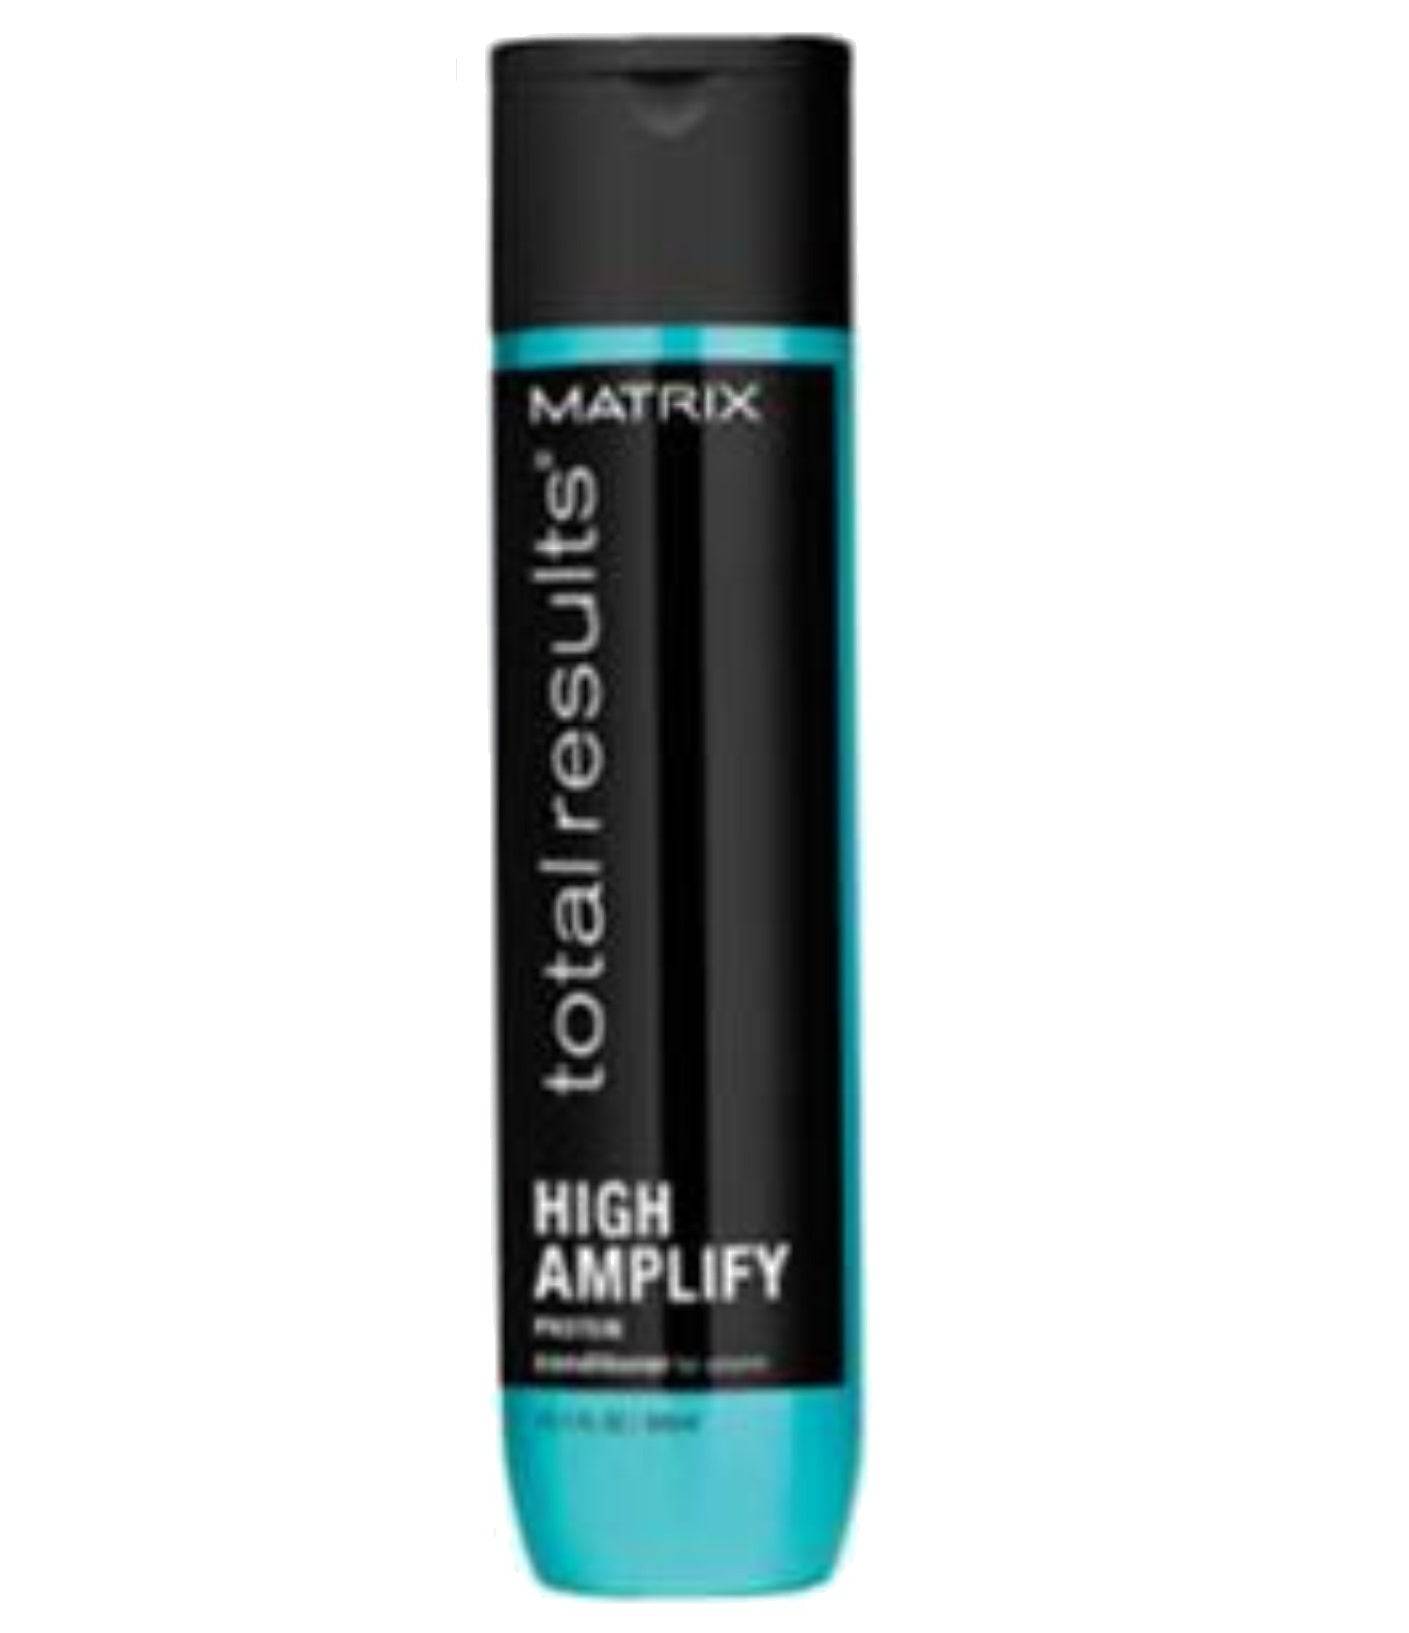 Matrix Total Results High Amplify Conditioner Matrix Total Results - On Line Hair Depot